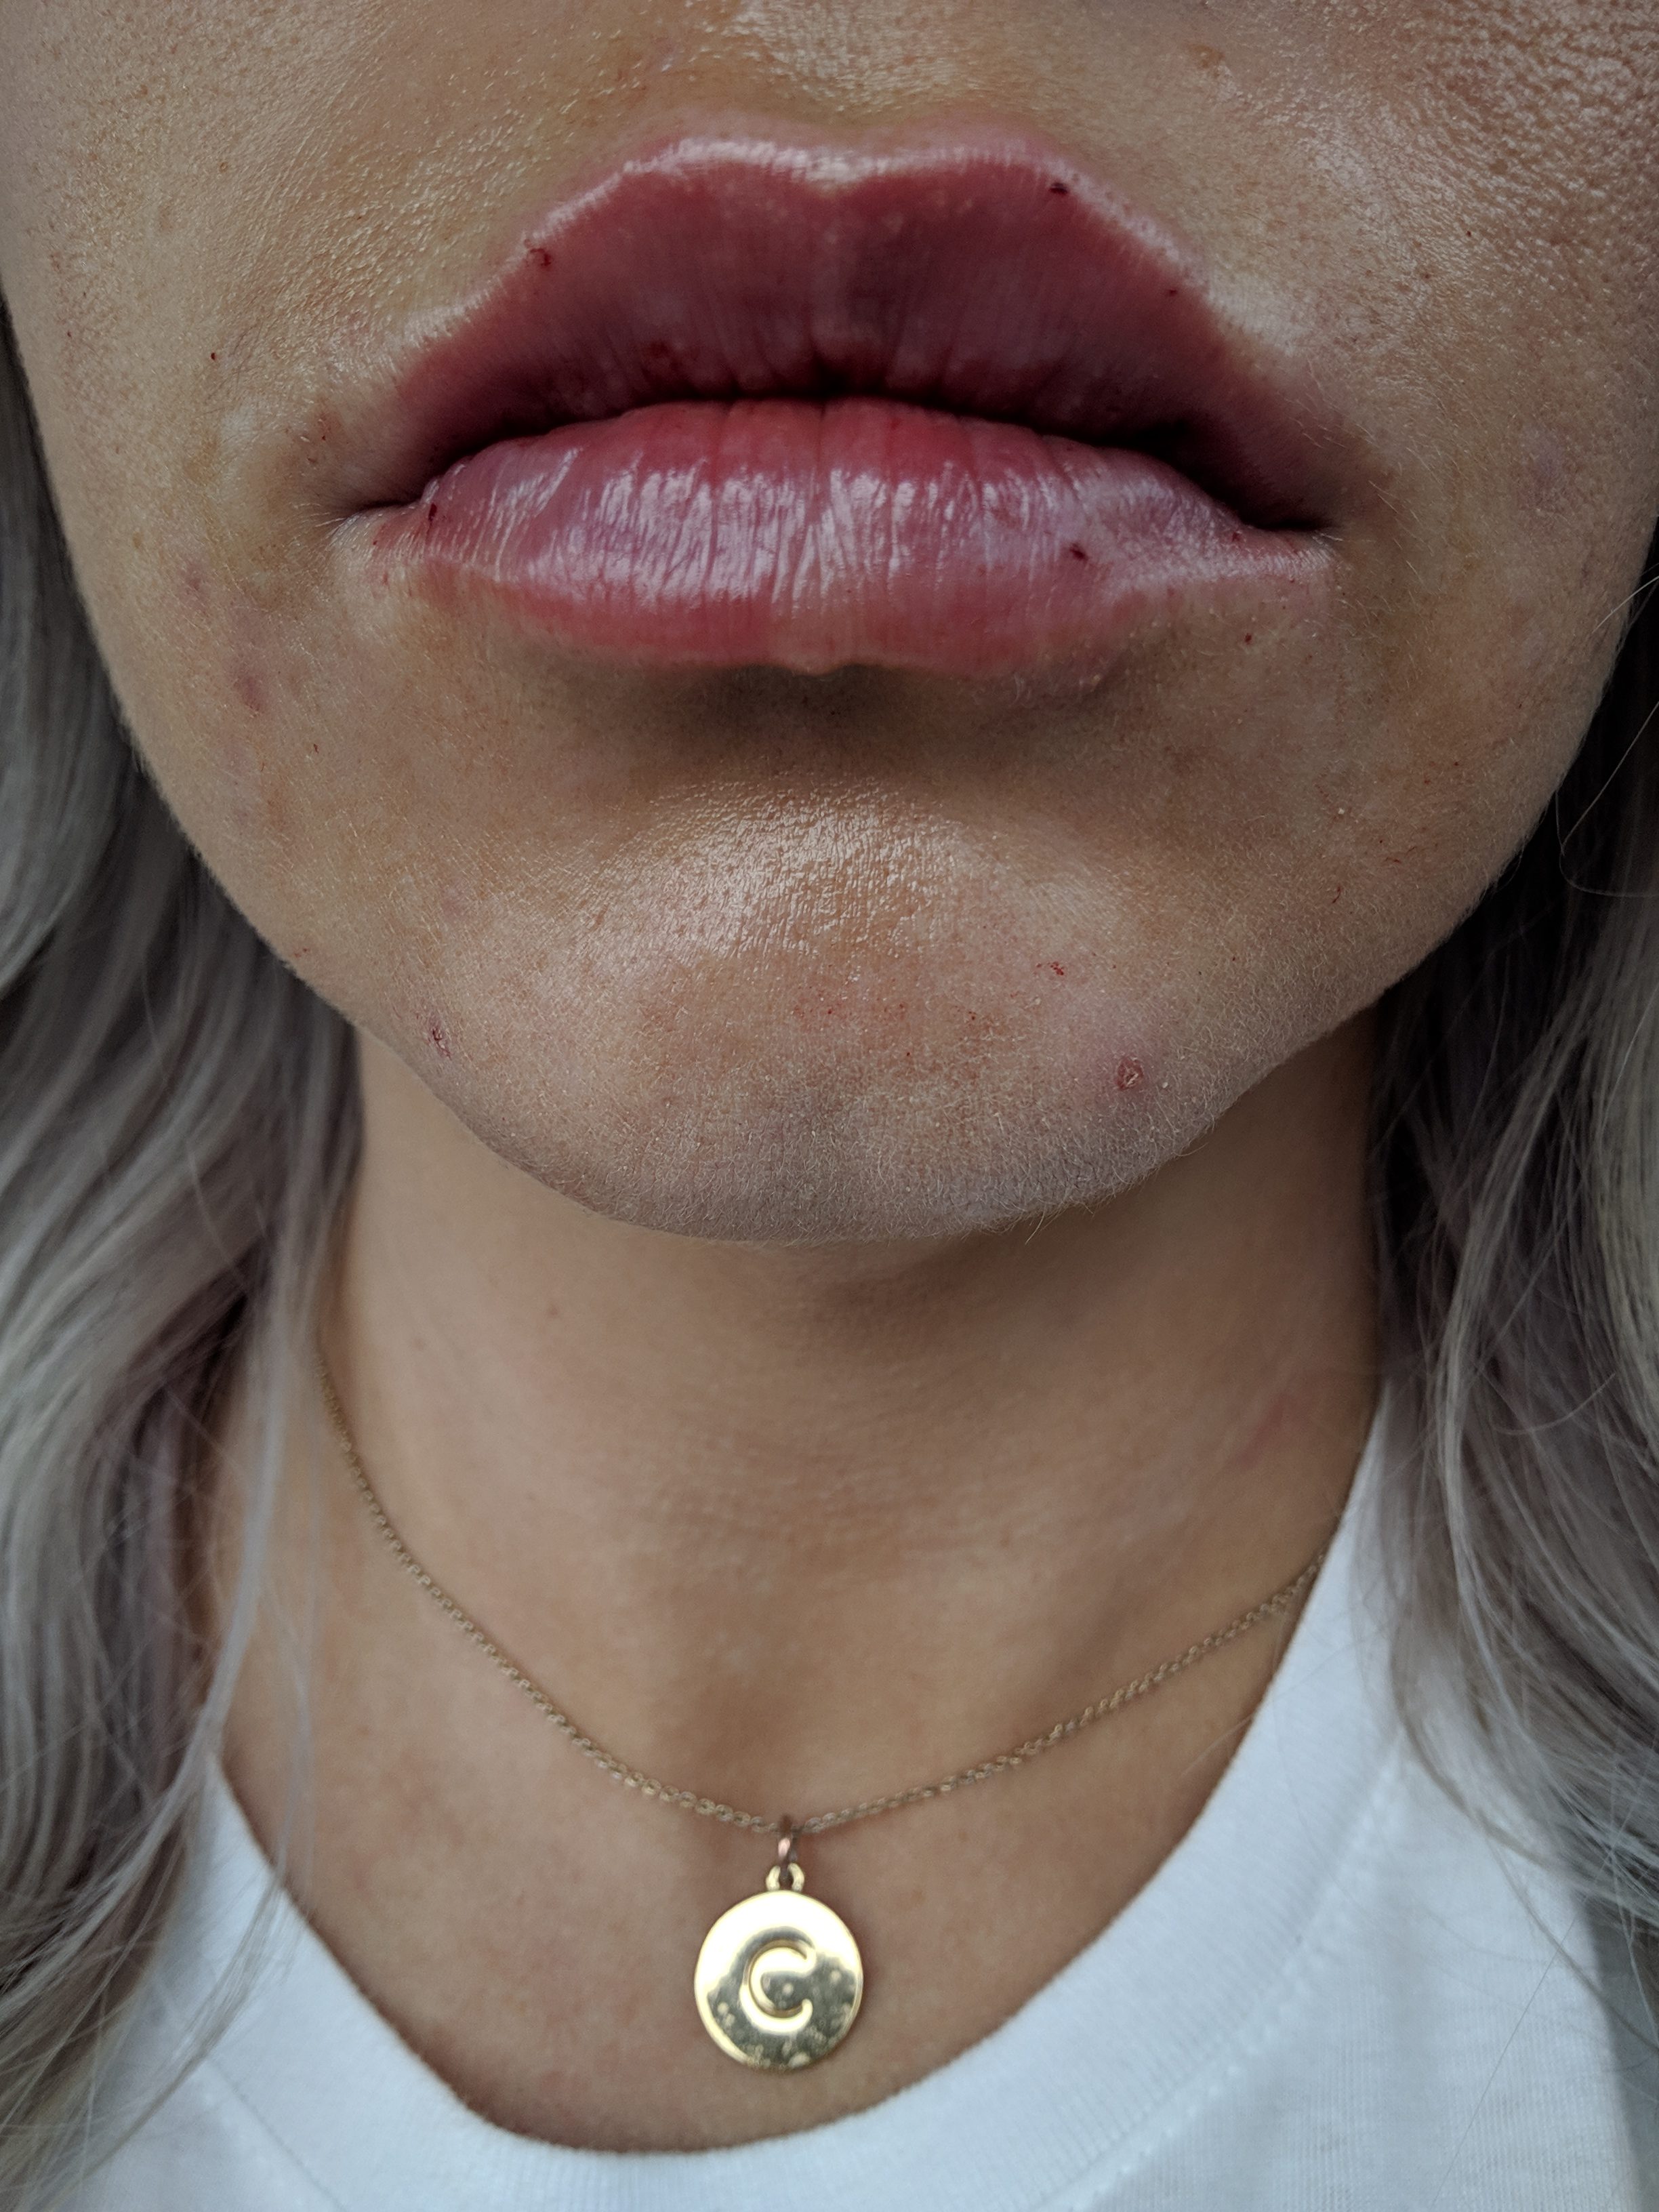 Are Lip Injections Worth It?: A before and after of lip injections using 0.5ml Restylane Defyne lip filler. Do lip injections hurt? What is getting lip injections like? And the best place for lip injections in Kansas City Olathe, Johnson County Dermatology review.